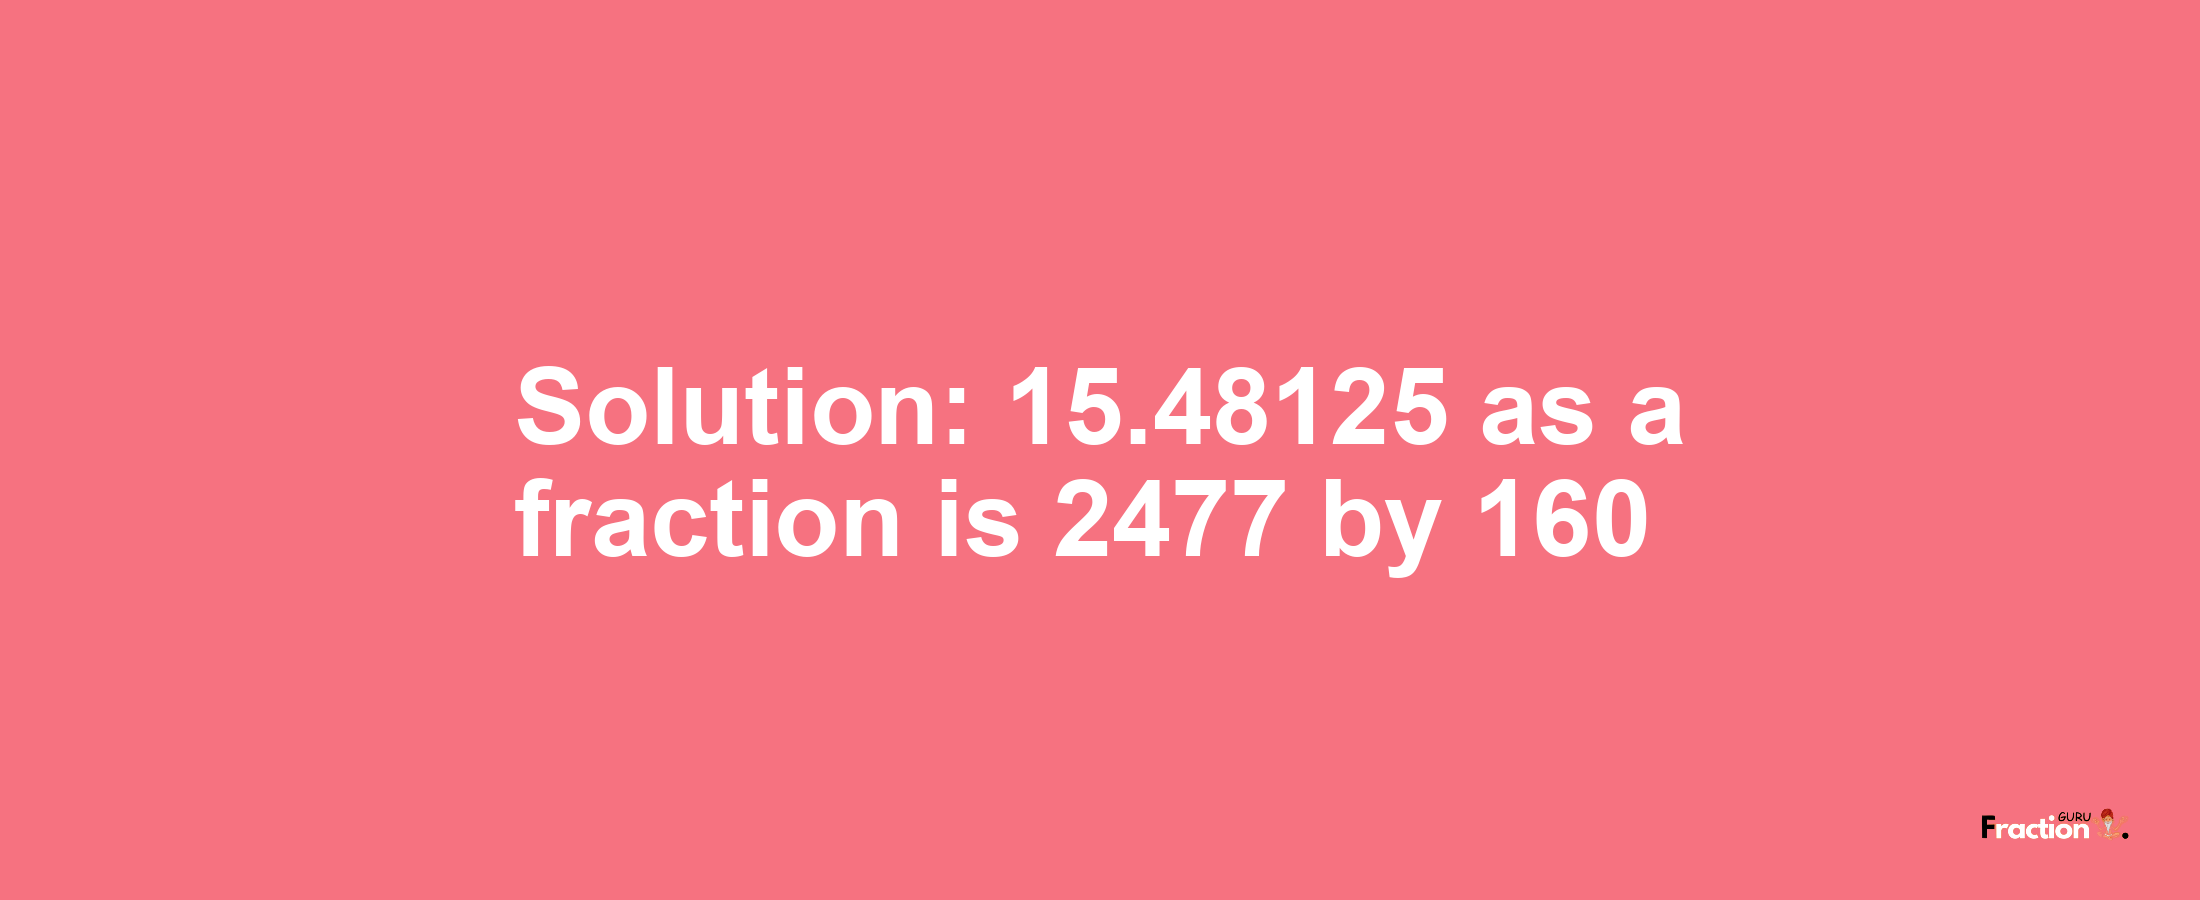 Solution:15.48125 as a fraction is 2477/160